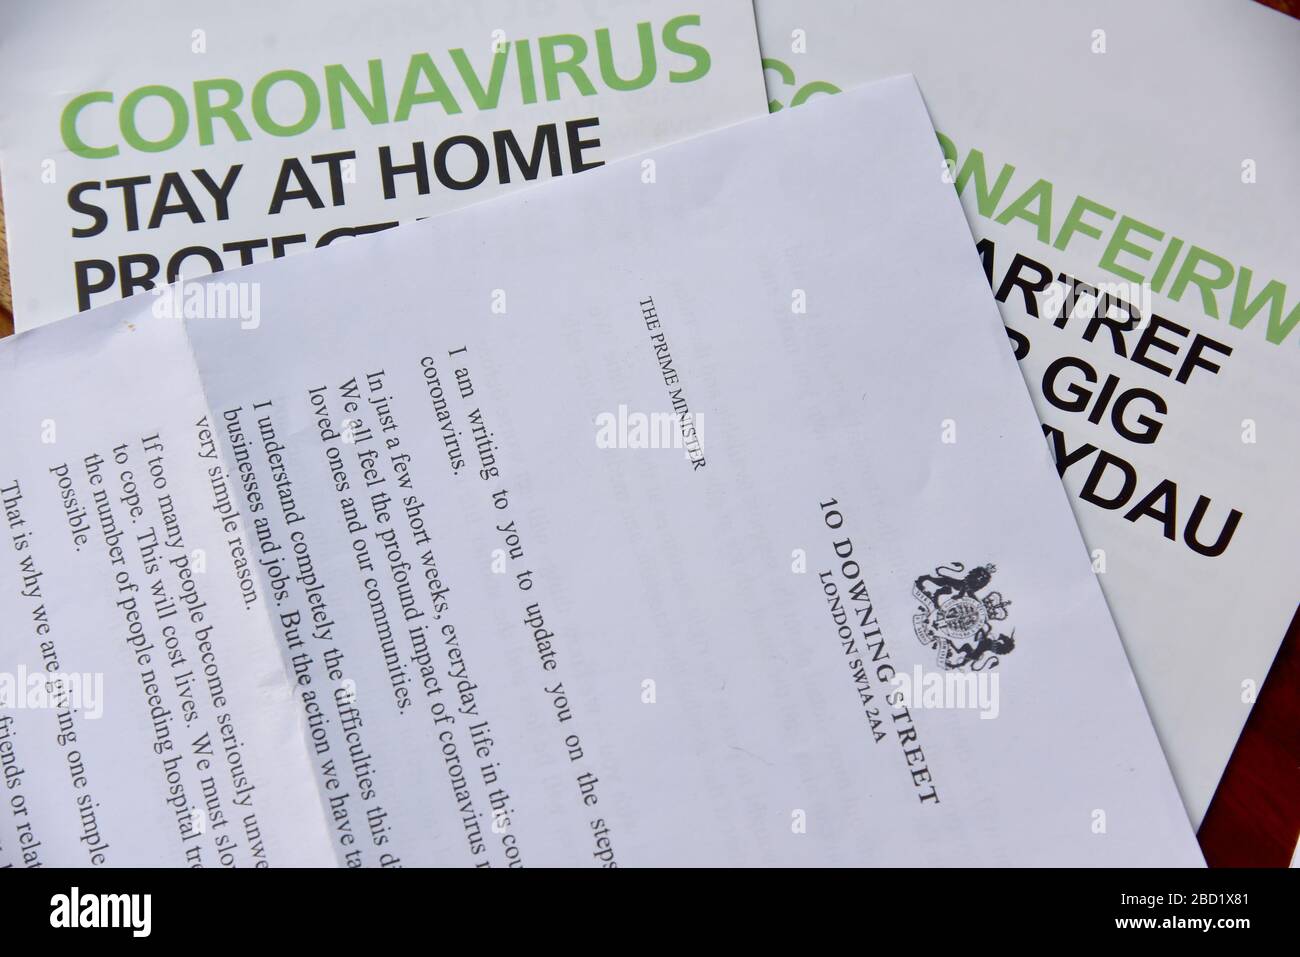 Coronavirus letter sent to every house hold in the United Kingdom by Prime Minister Boris Johnson. Stay at home Protect the NHS Save lives Stock Photo